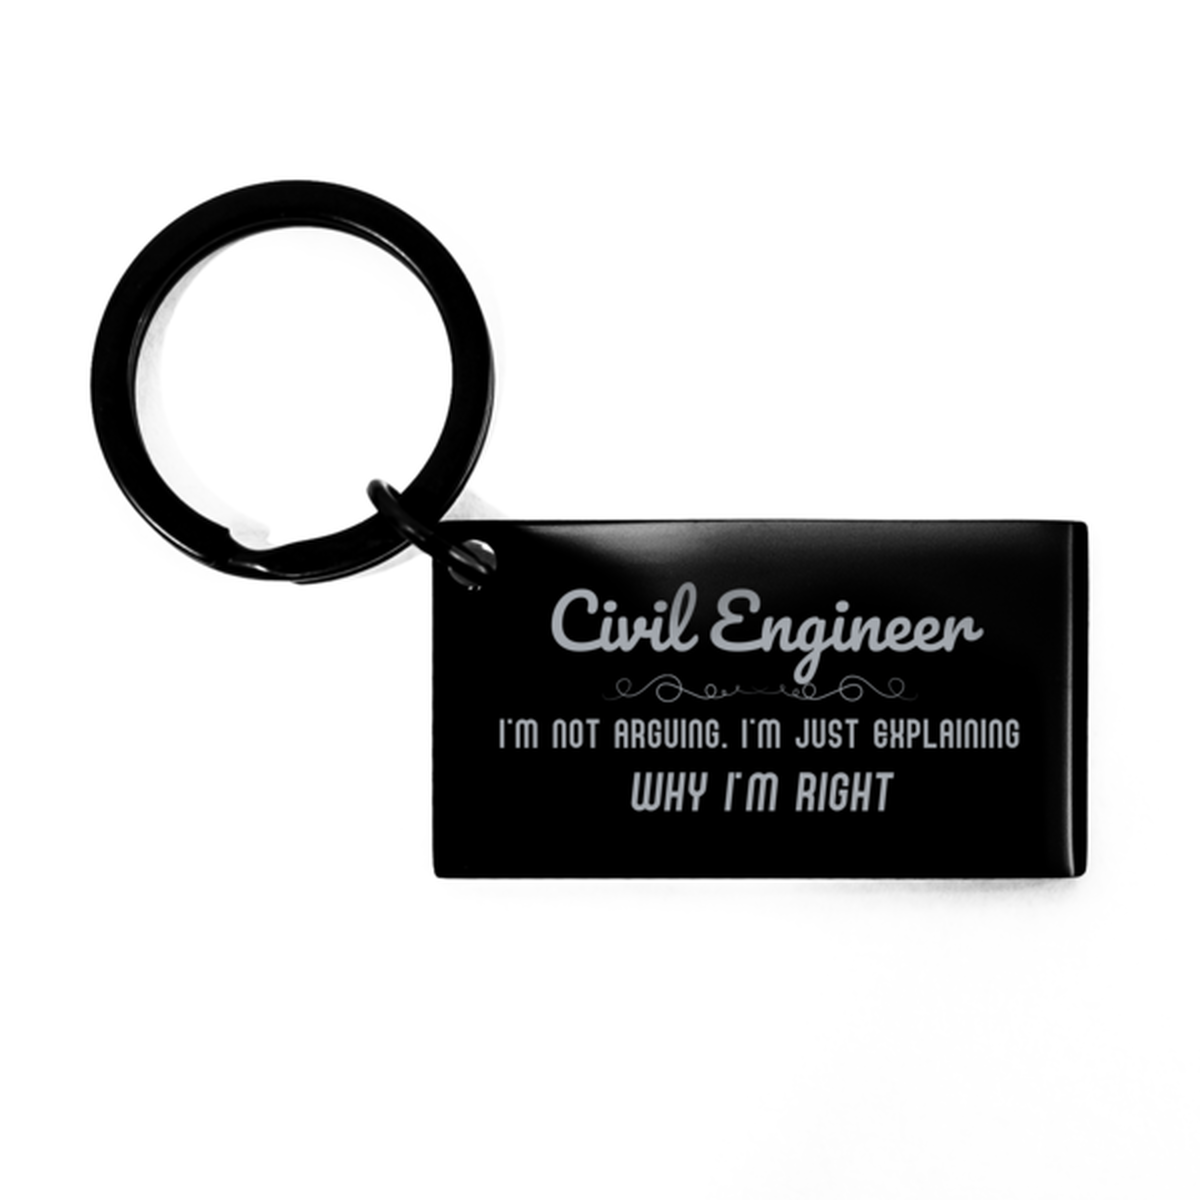 Civil Engineer I'm not Arguing. I'm Just Explaining Why I'm RIGHT Keychain, Funny Saying Quote Civil Engineer Gifts For Civil Engineer Graduation Birthday Christmas Gifts for Men Women Coworker